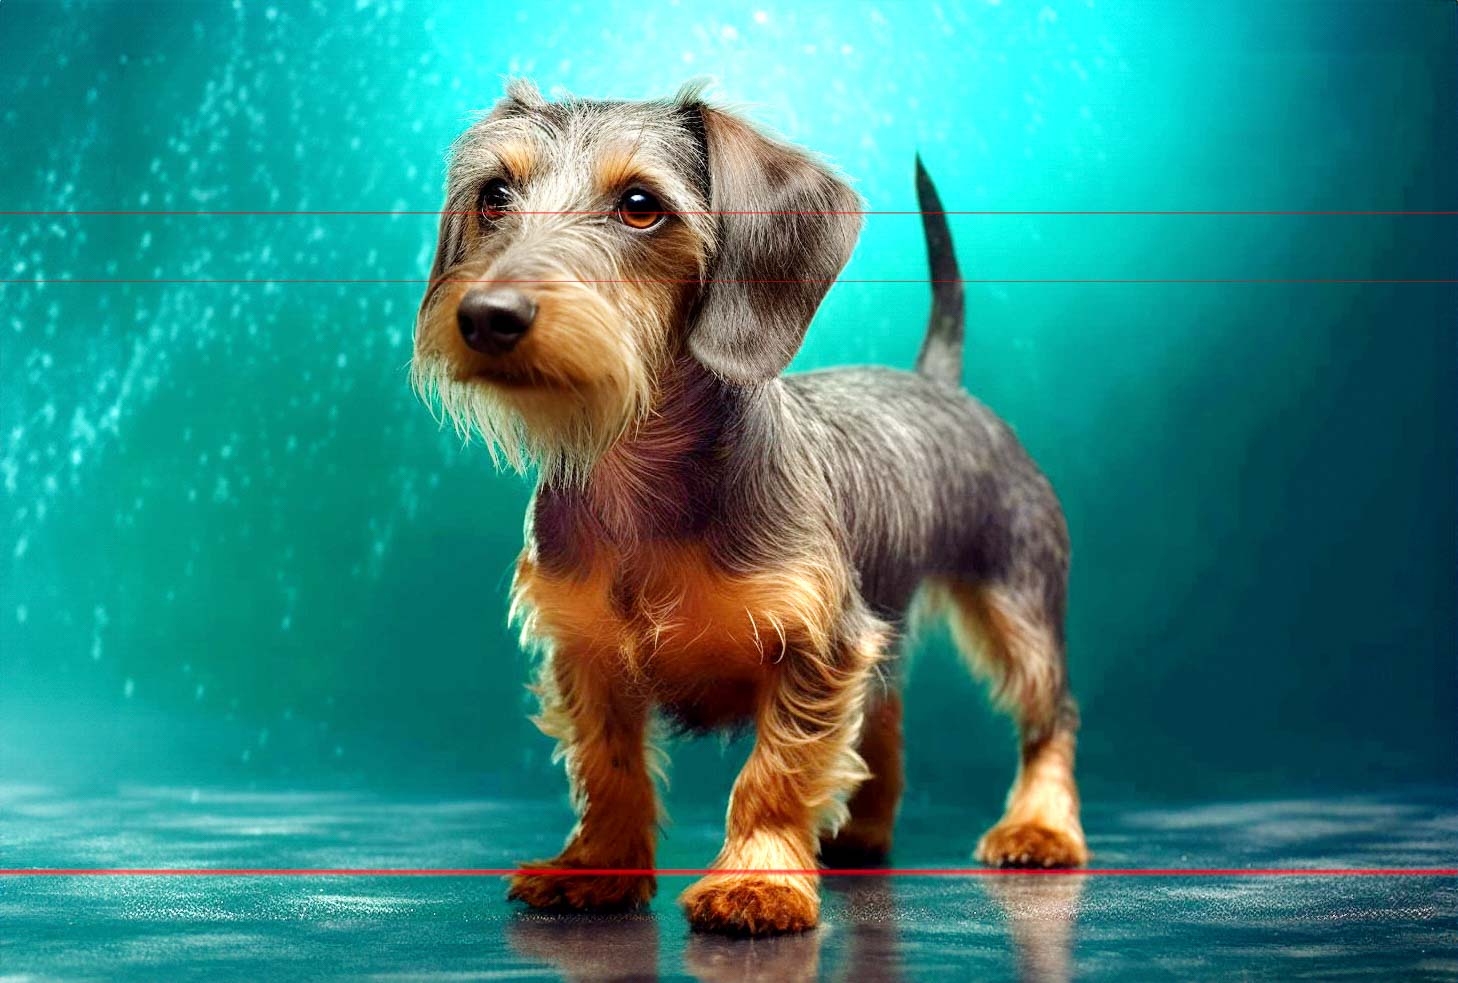 A small, wiry-haired dachshund with a long body and short legs stands on a shiny surface in the picture. Its fur is a mix of gray and light brown. The dog's ears are floppy, and its tail is upright. The background is a vibrant teal with light reflections, giving a striking contrast to the dog's fur